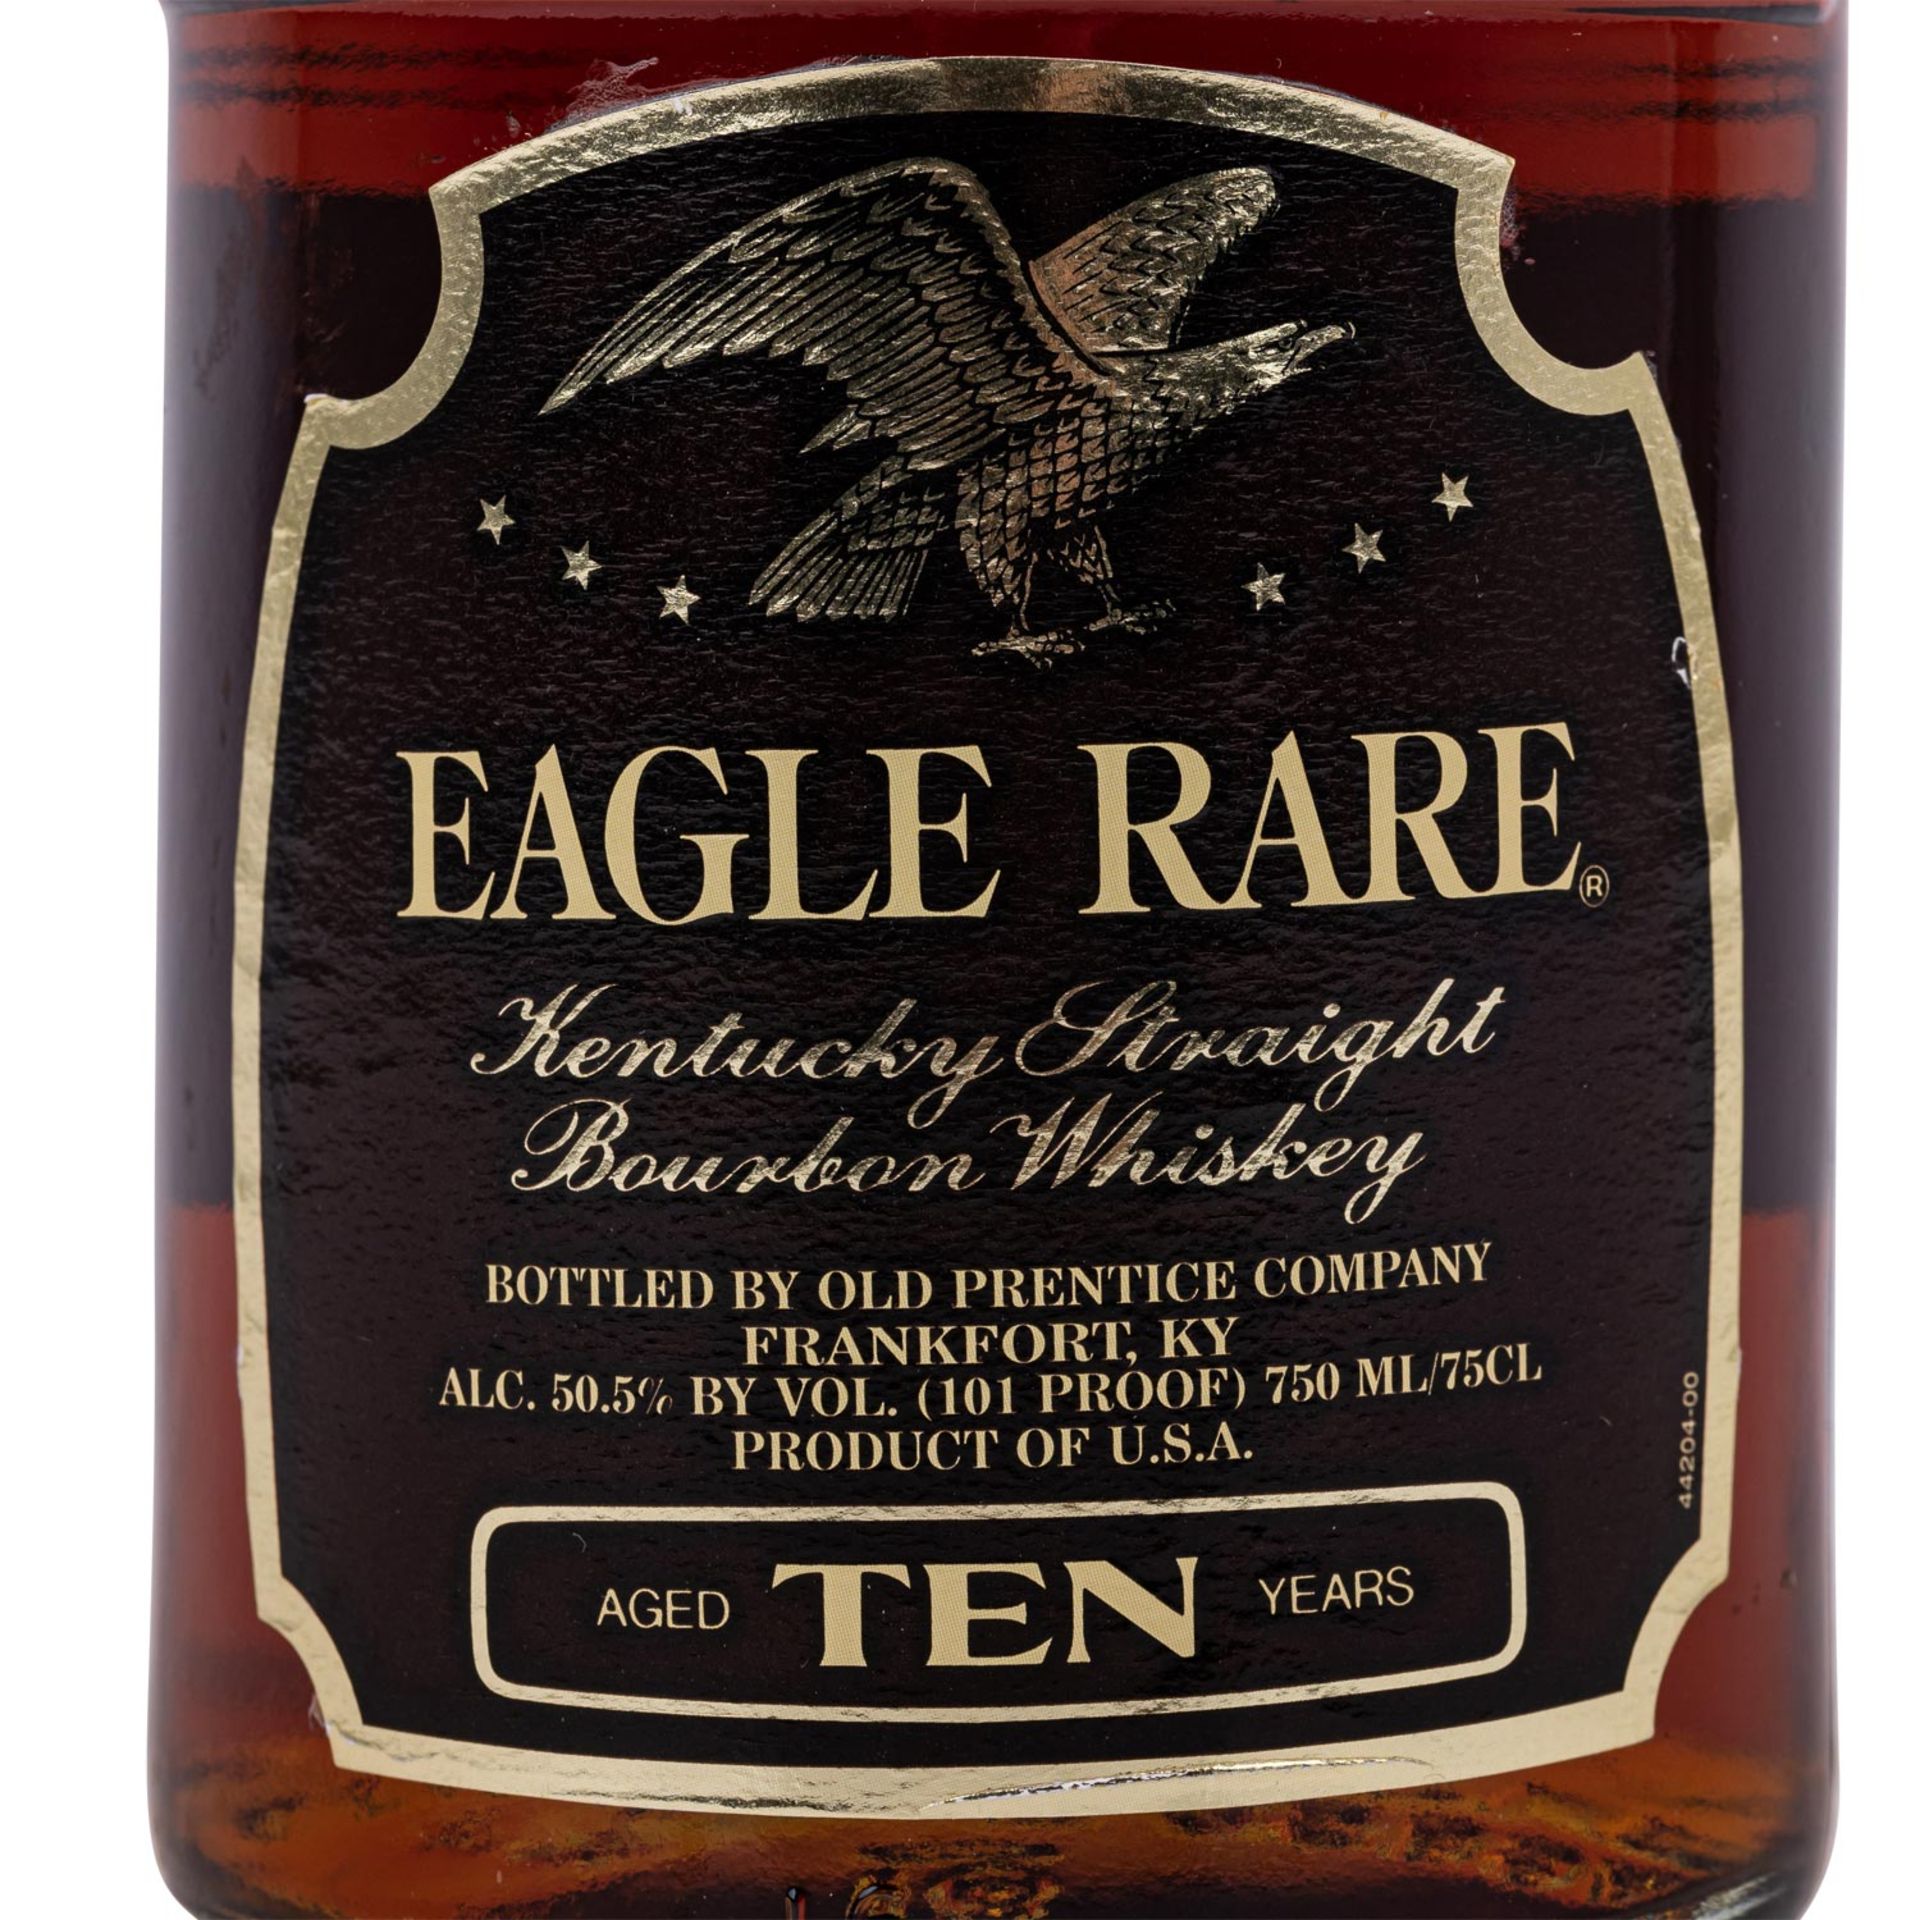 EAGLE RARE Straight Bourbon Whiskey "Aged 10 Years" - Image 2 of 4